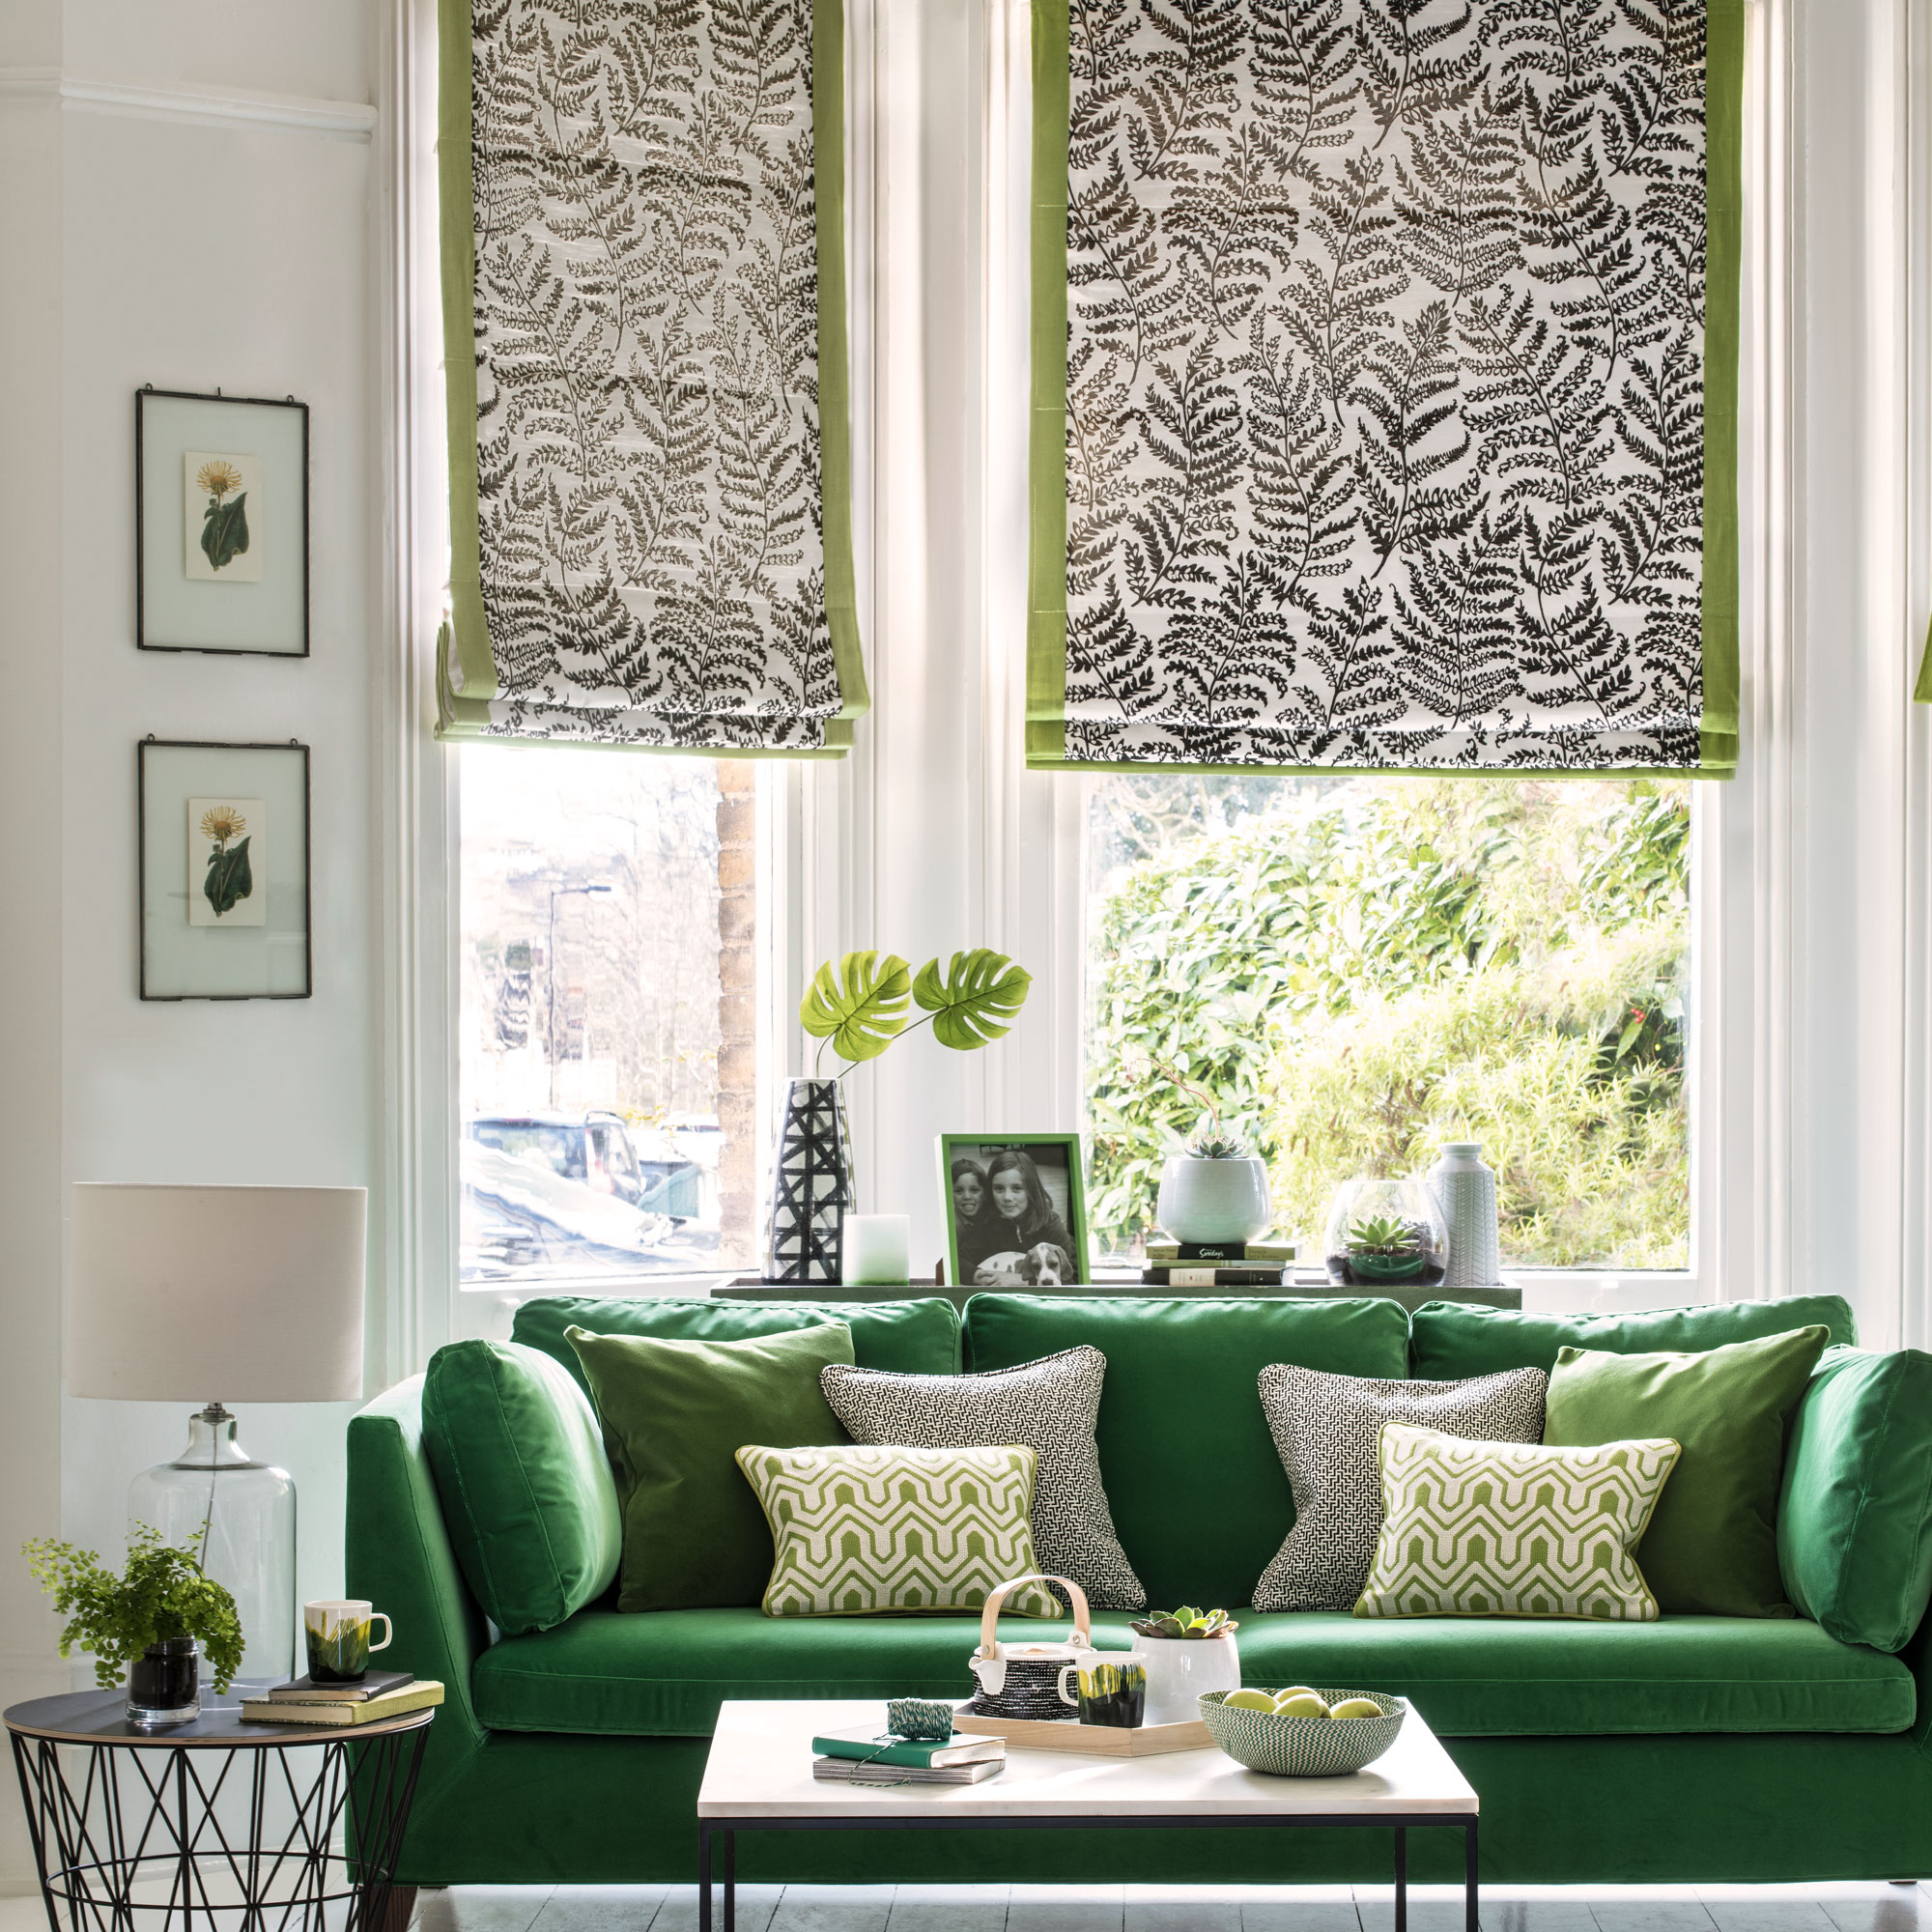 Neutral living room with a deep forest green sofa and patterned Roman blinds